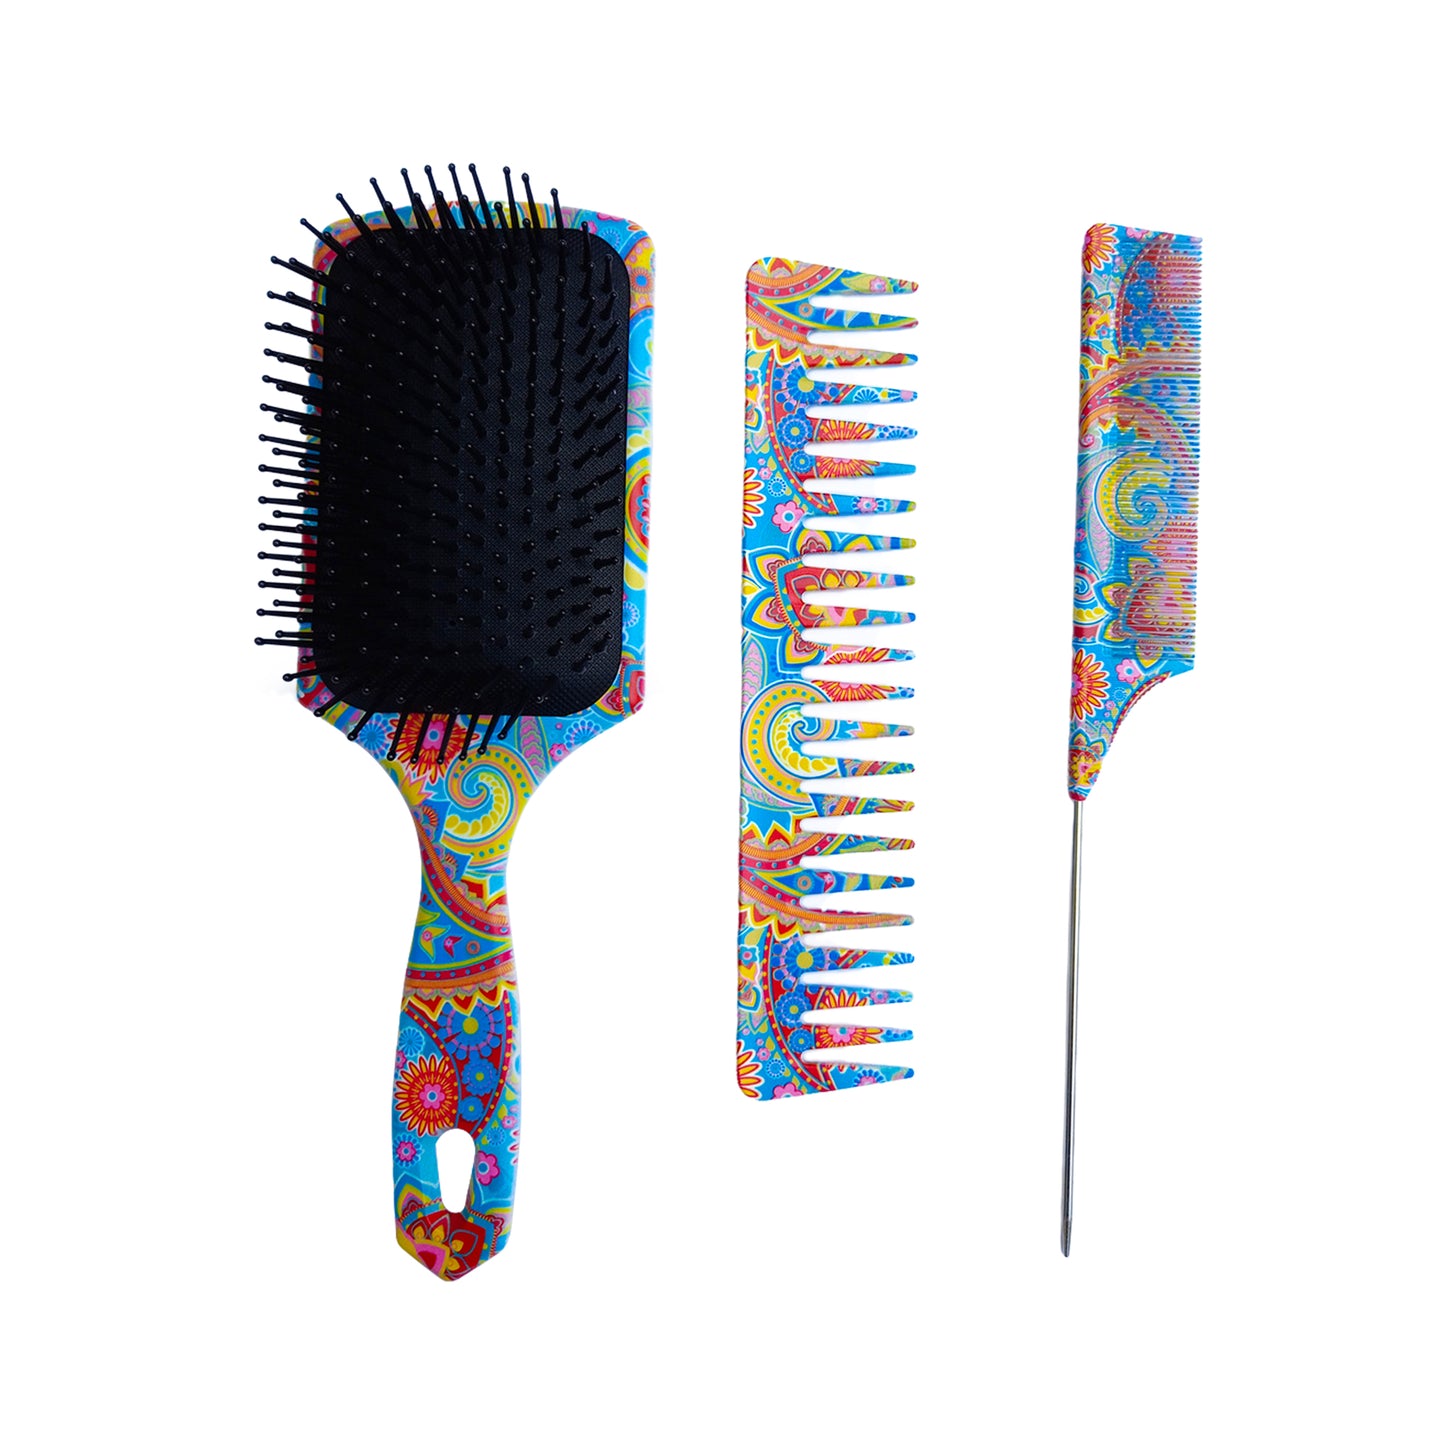 The Oriental Hair Brush and Comb Set